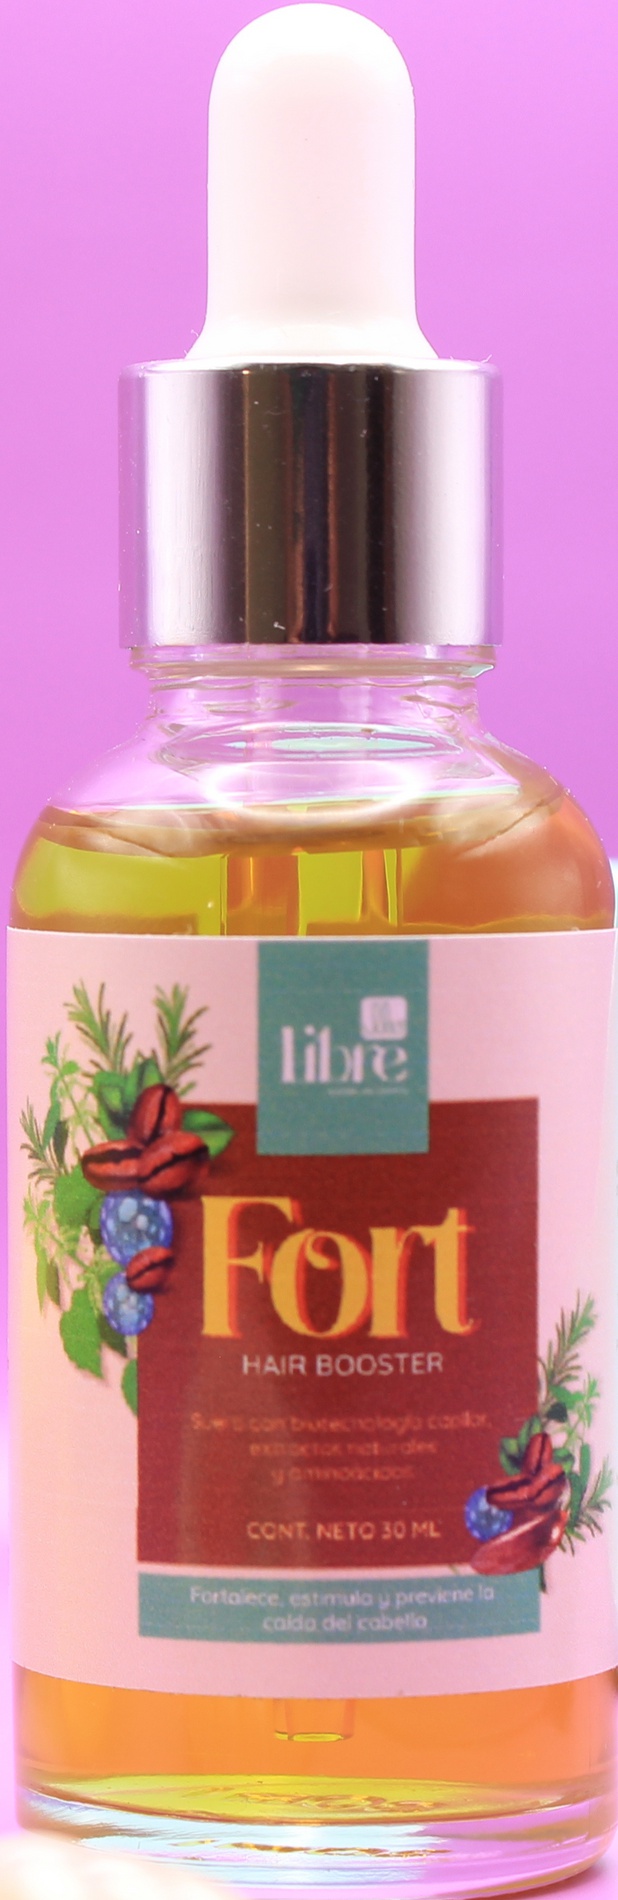 Libre Fort Hair Booster